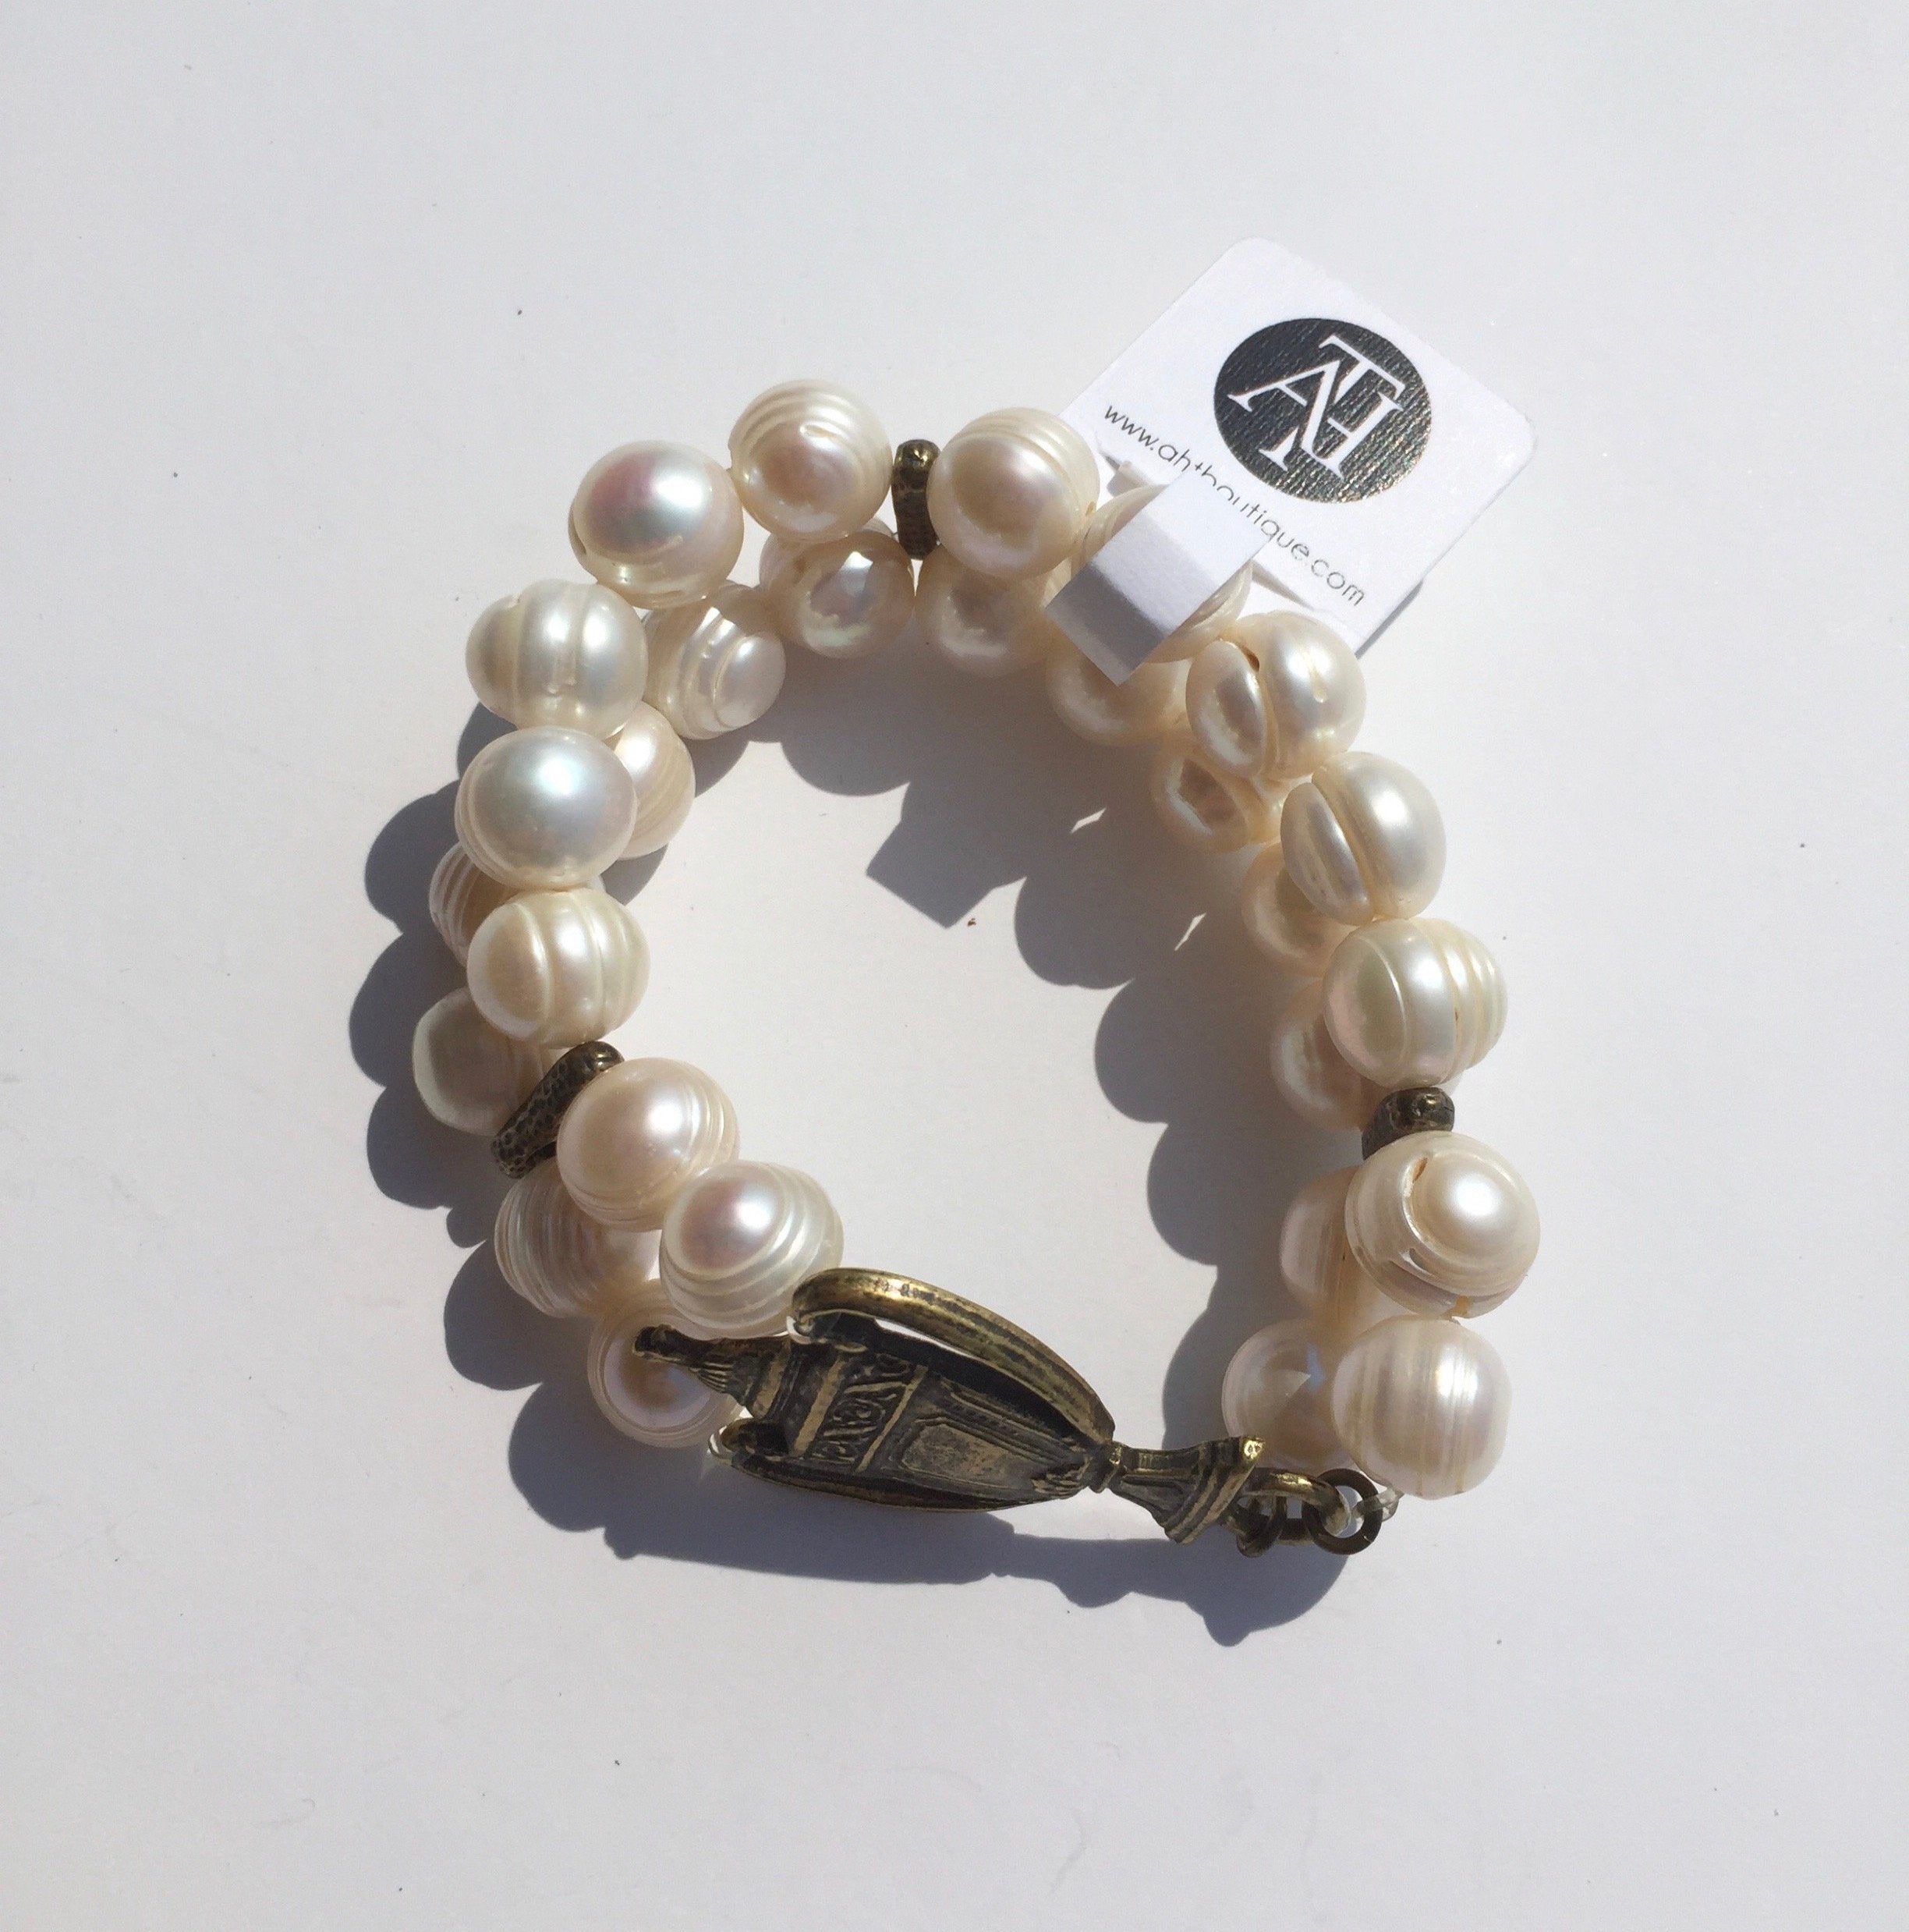 French Kande Bracelet White Beads with Trophy